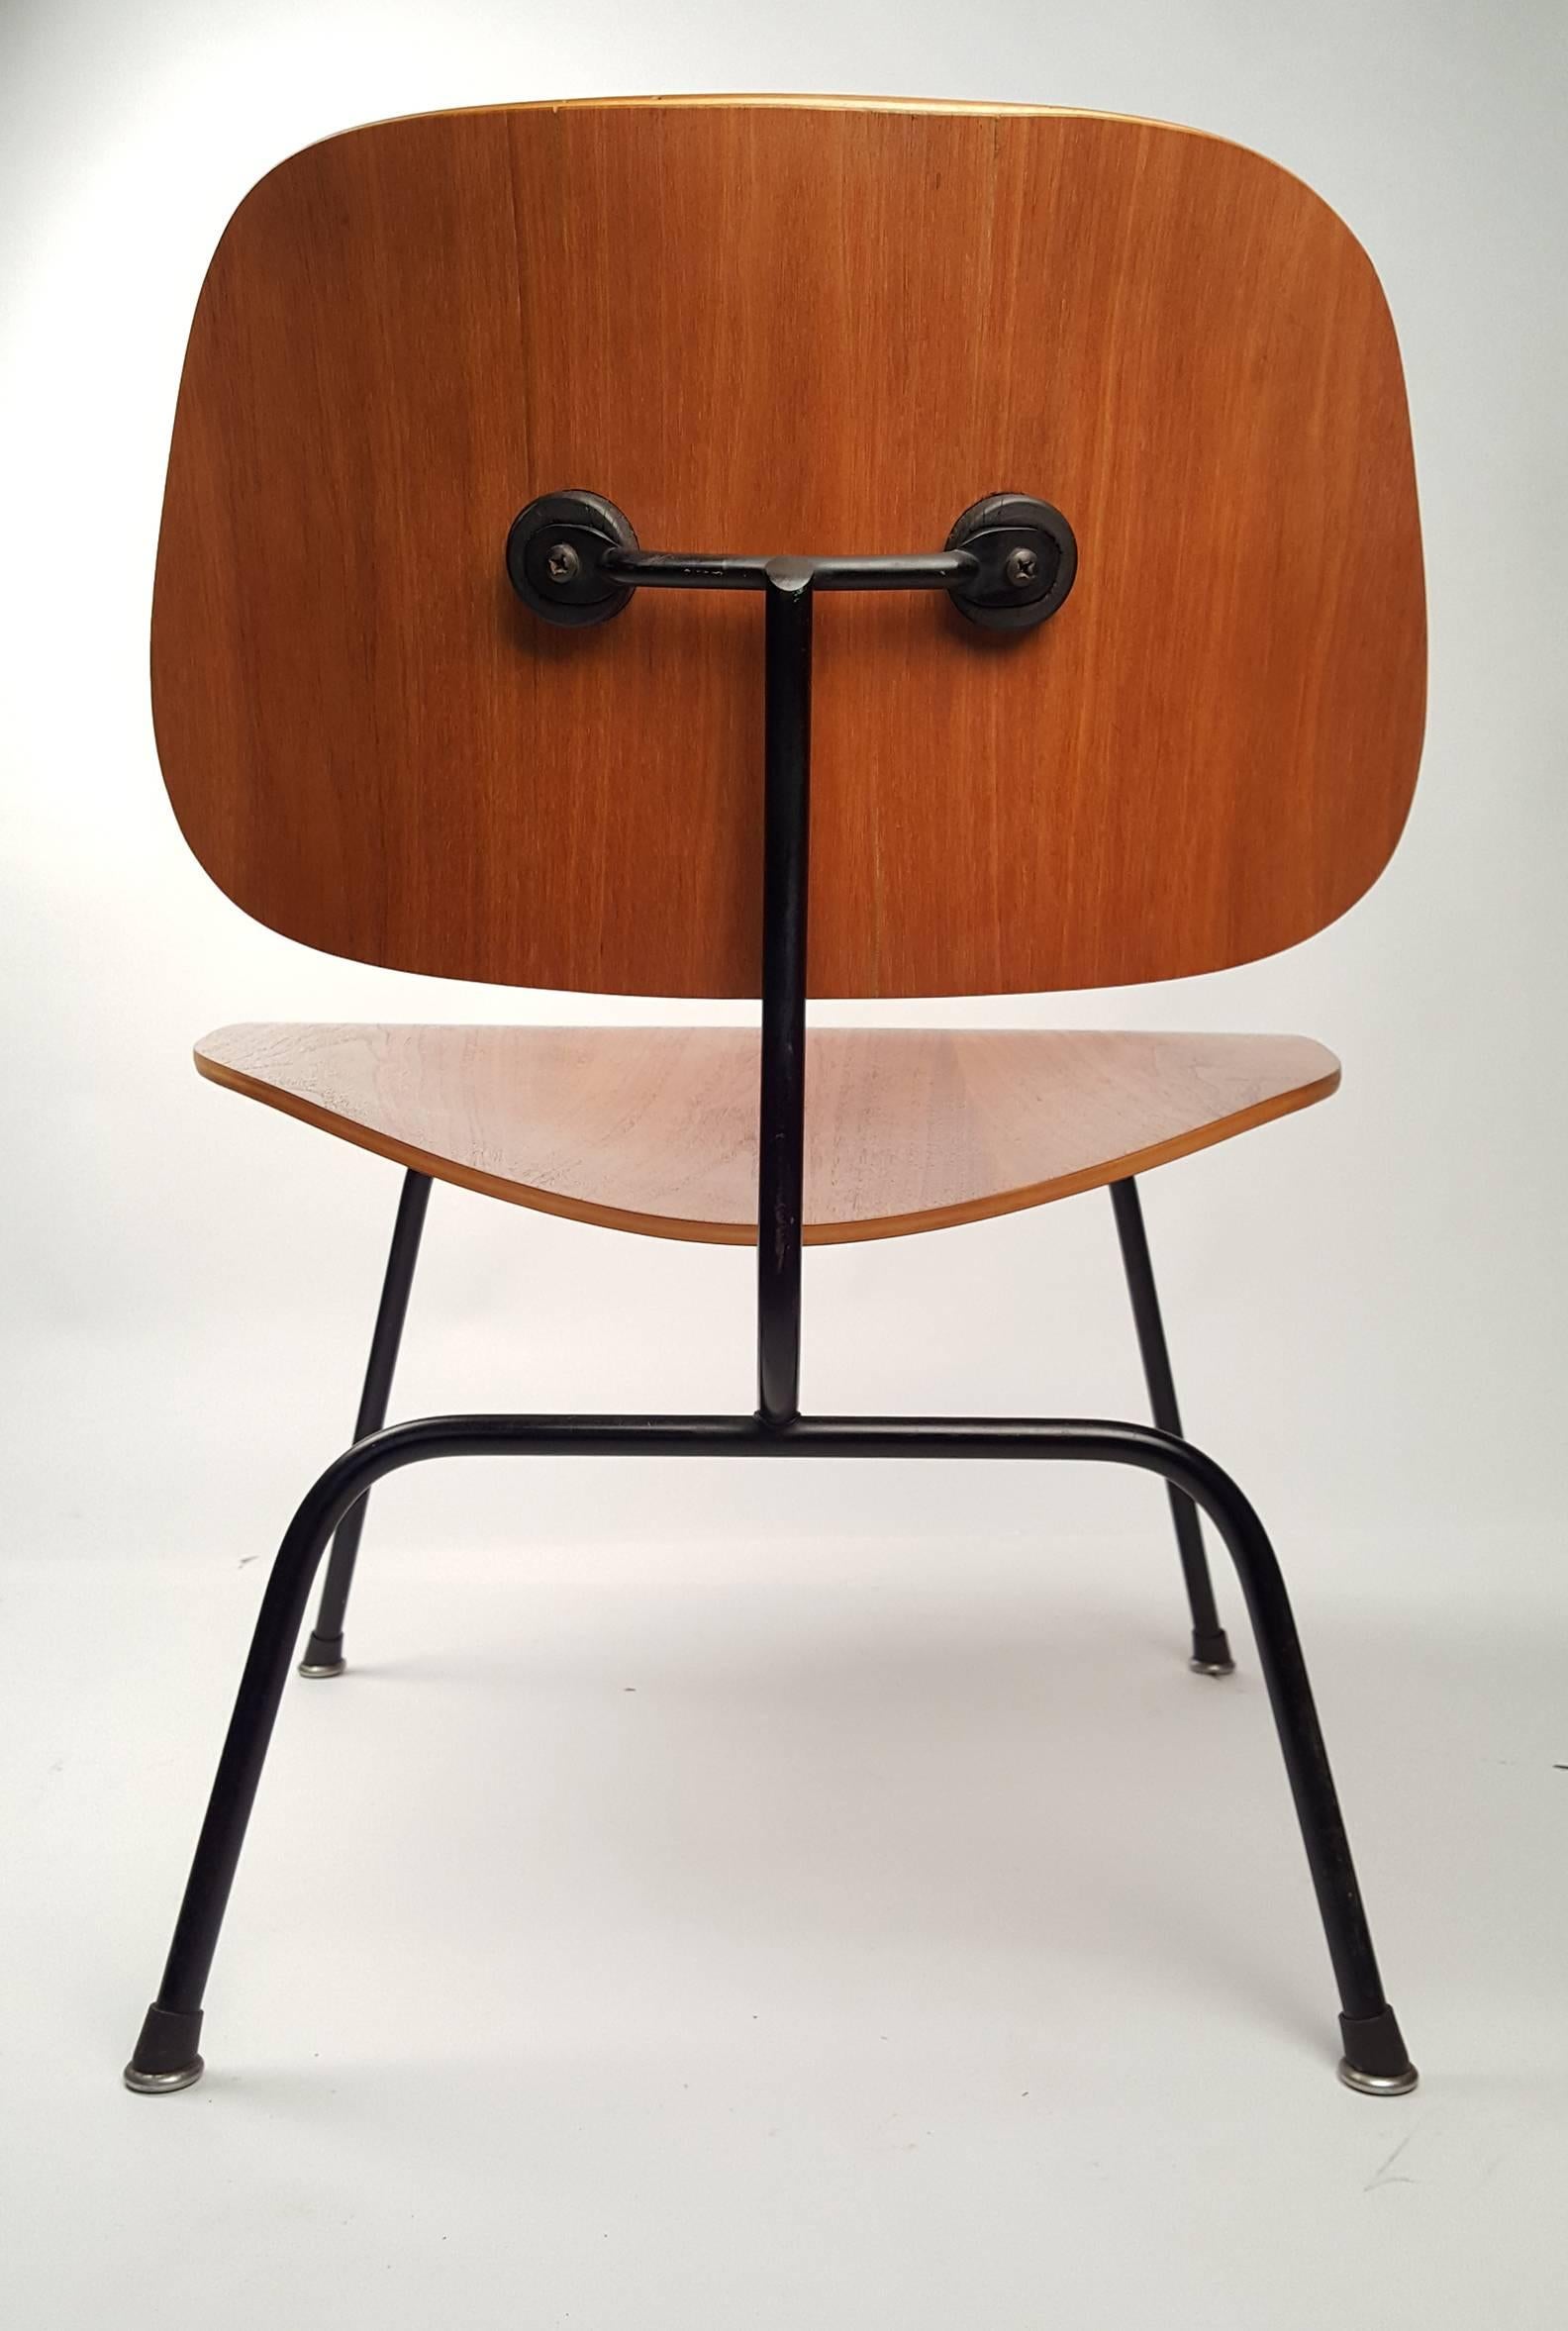 American Charles Eames LCM Chair for Herman Miller, 1950s walnut and black